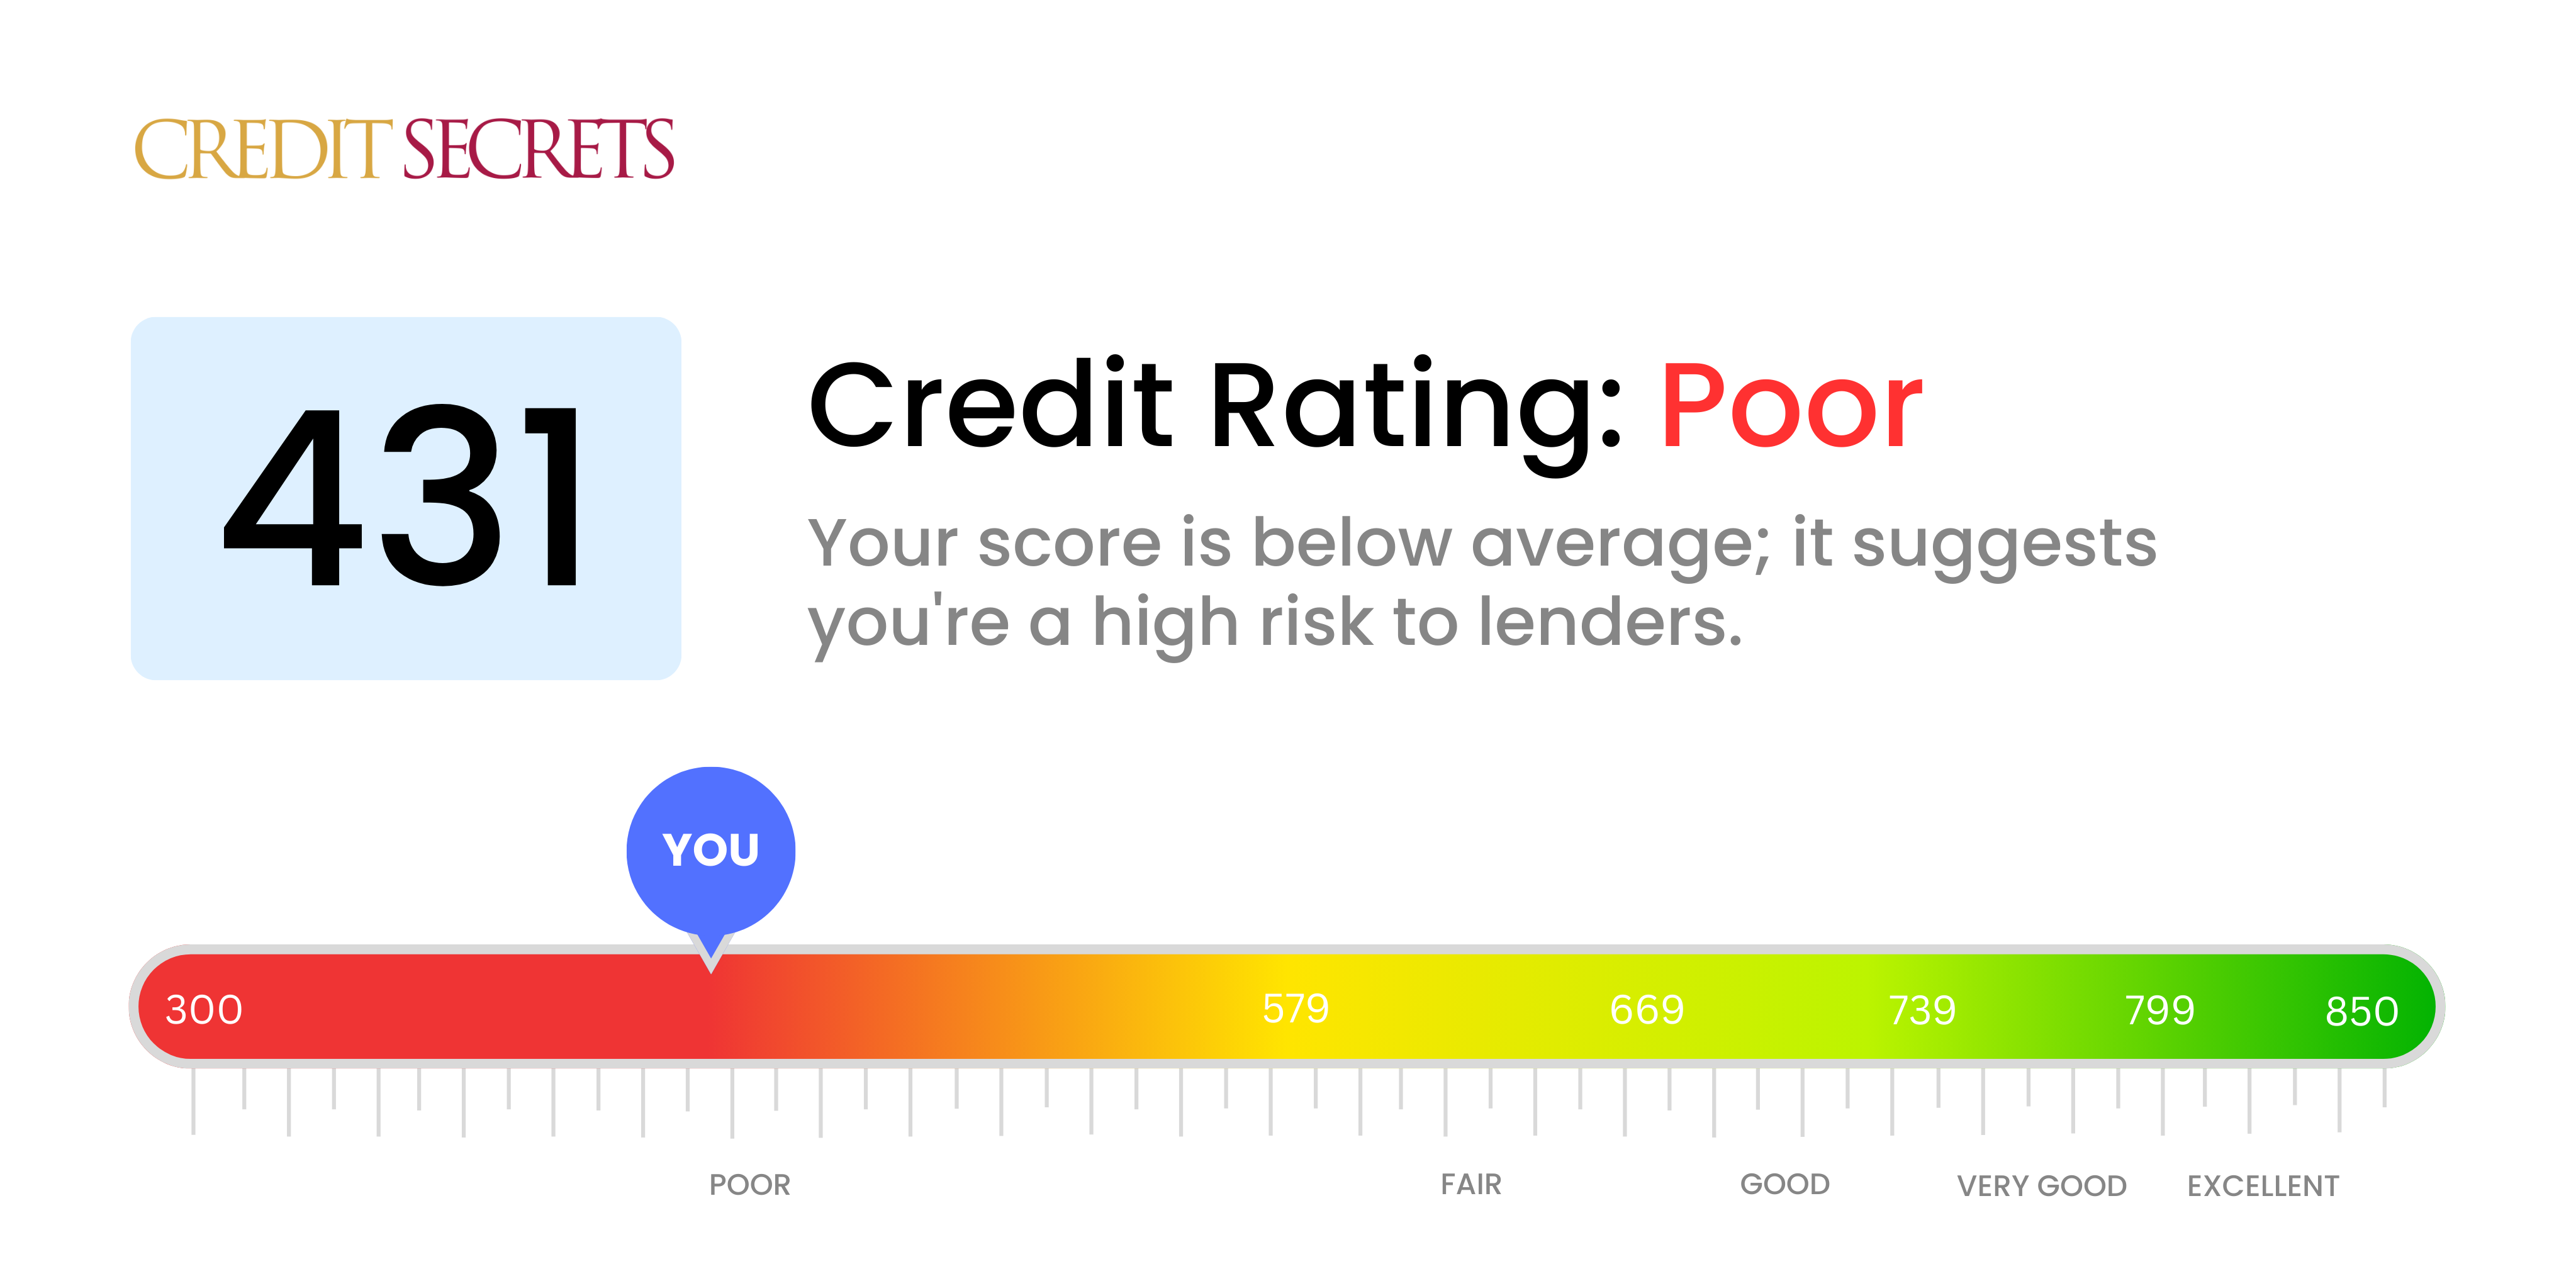 Is 431 a good credit score?